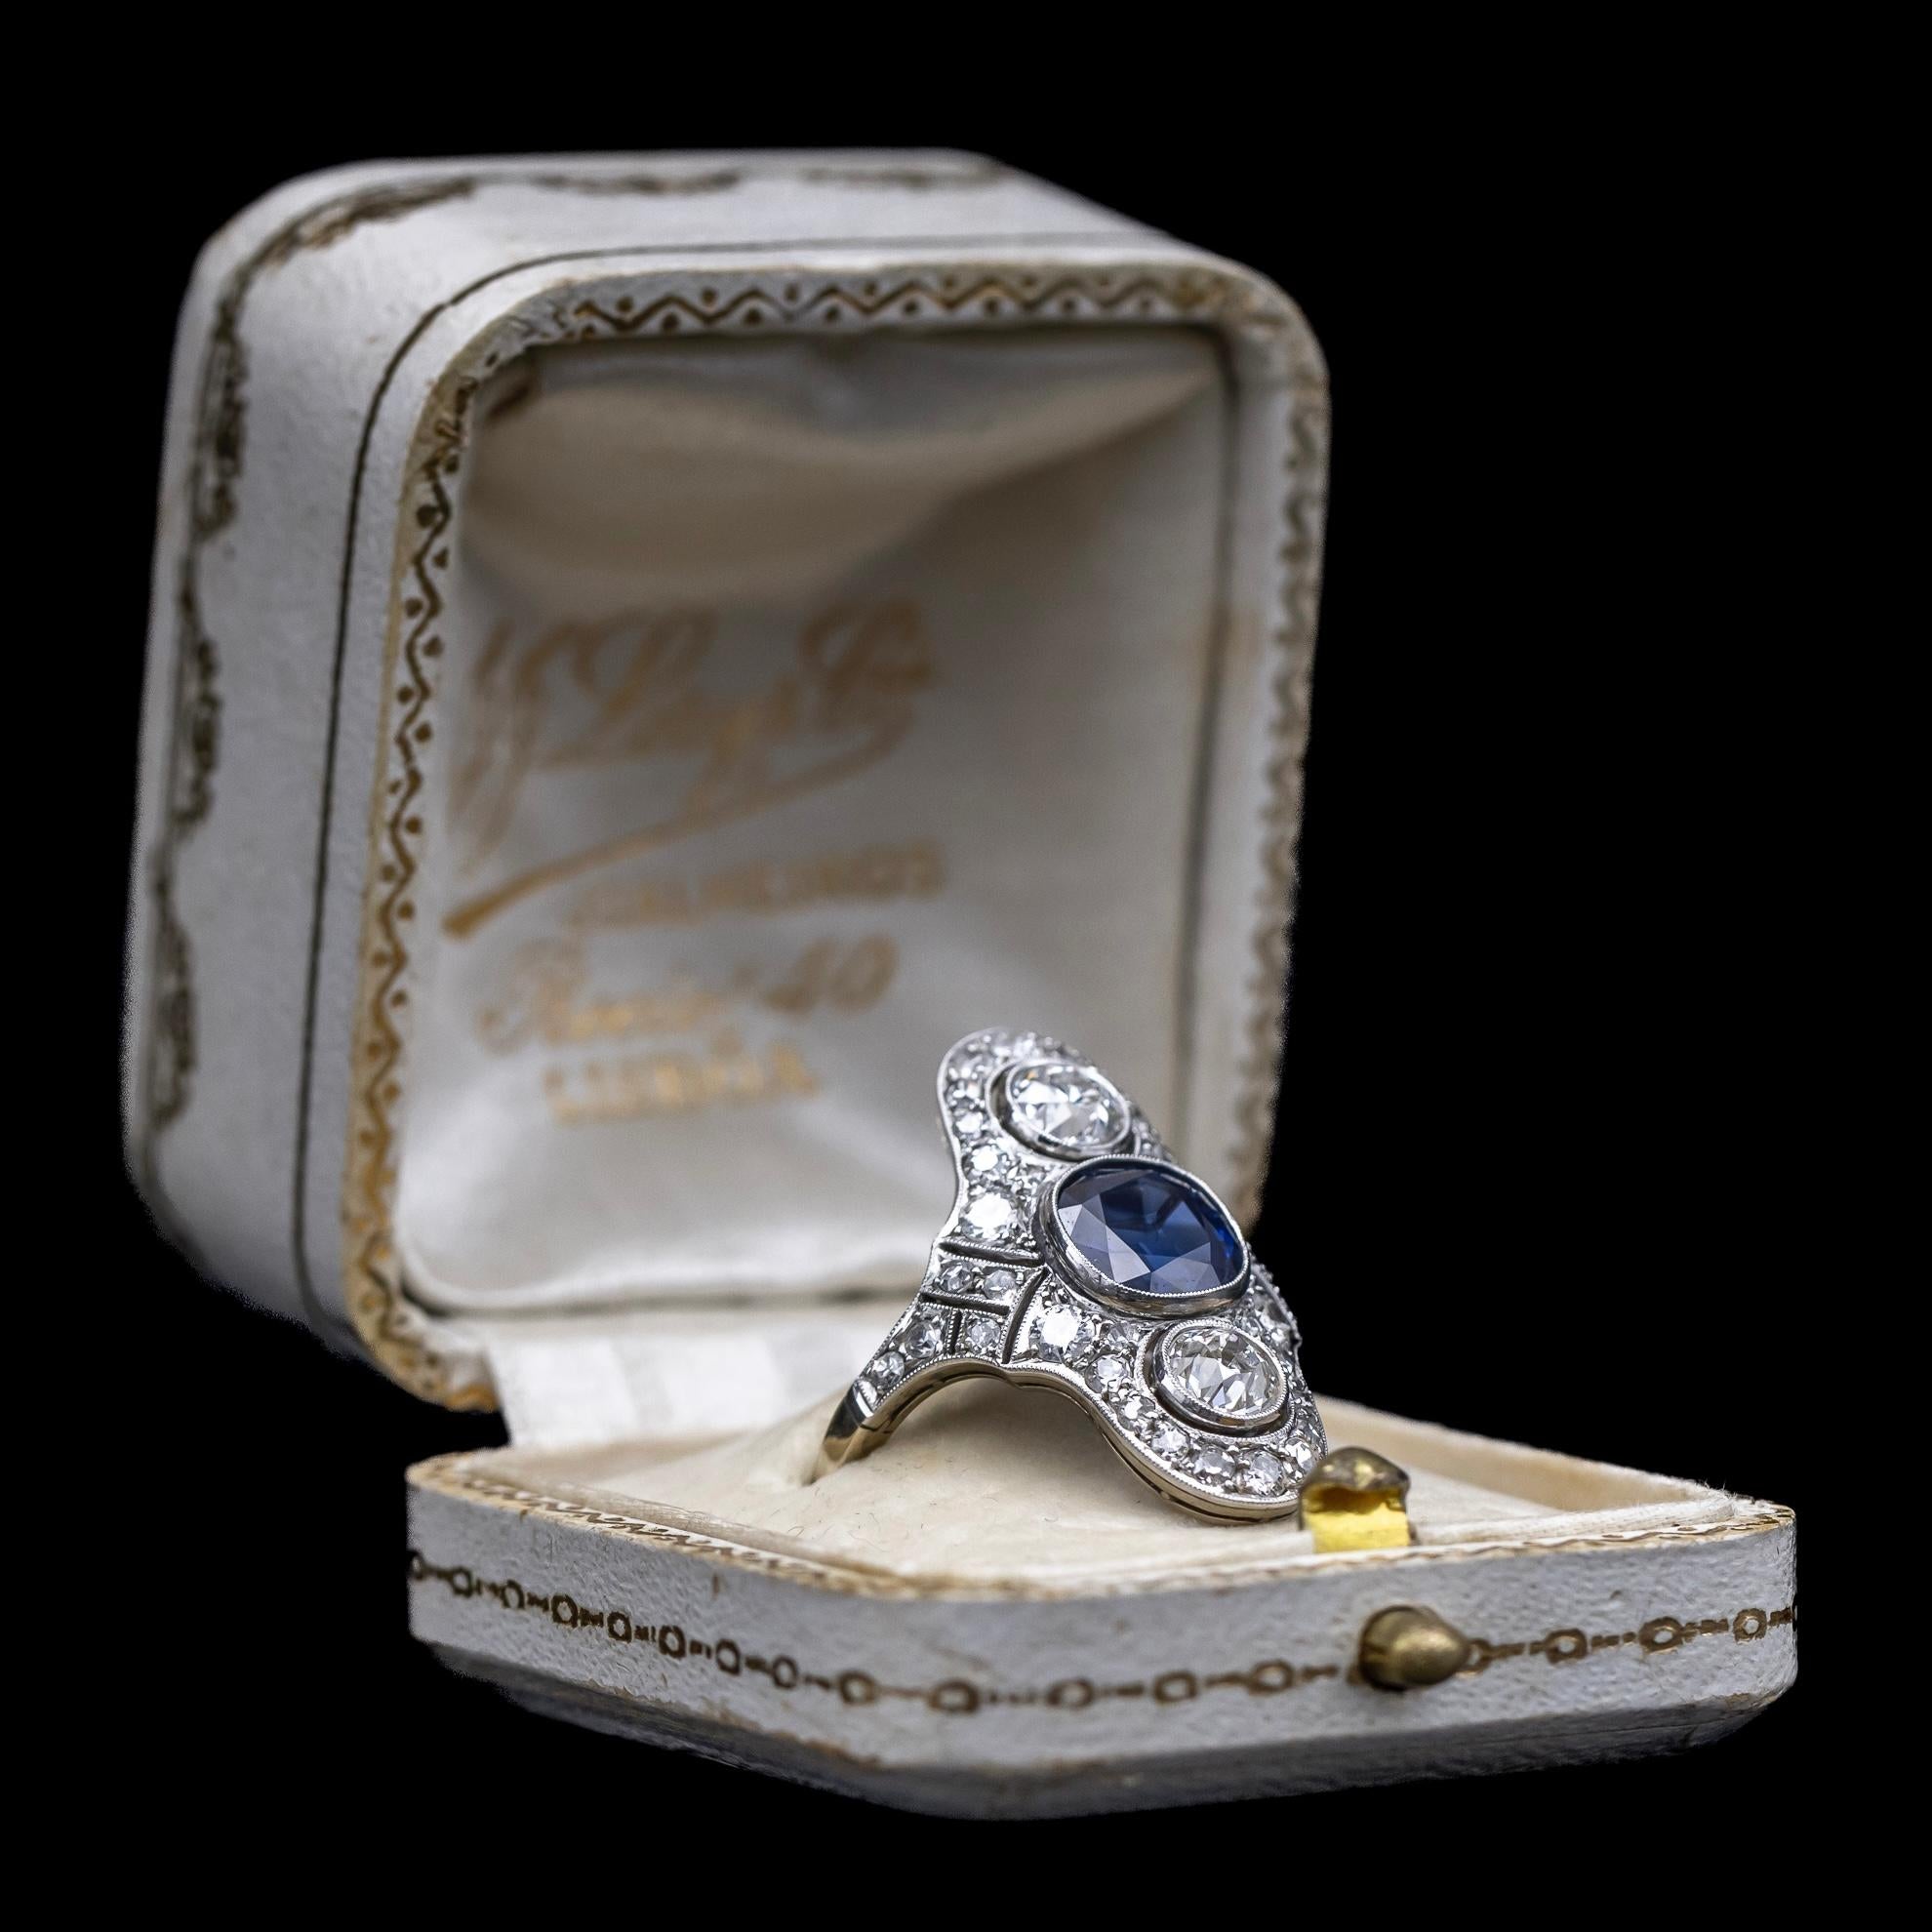 Art Deco certified 2.5-carat natural sapphire and 2.25-carat diamond cocktail or engagement ring in platinum and yellow gold, by Portuguese jeweler Joaquim Lory & Cª and accompanied by its original maker’s box, 1920s/1930s.

This exquisite ring